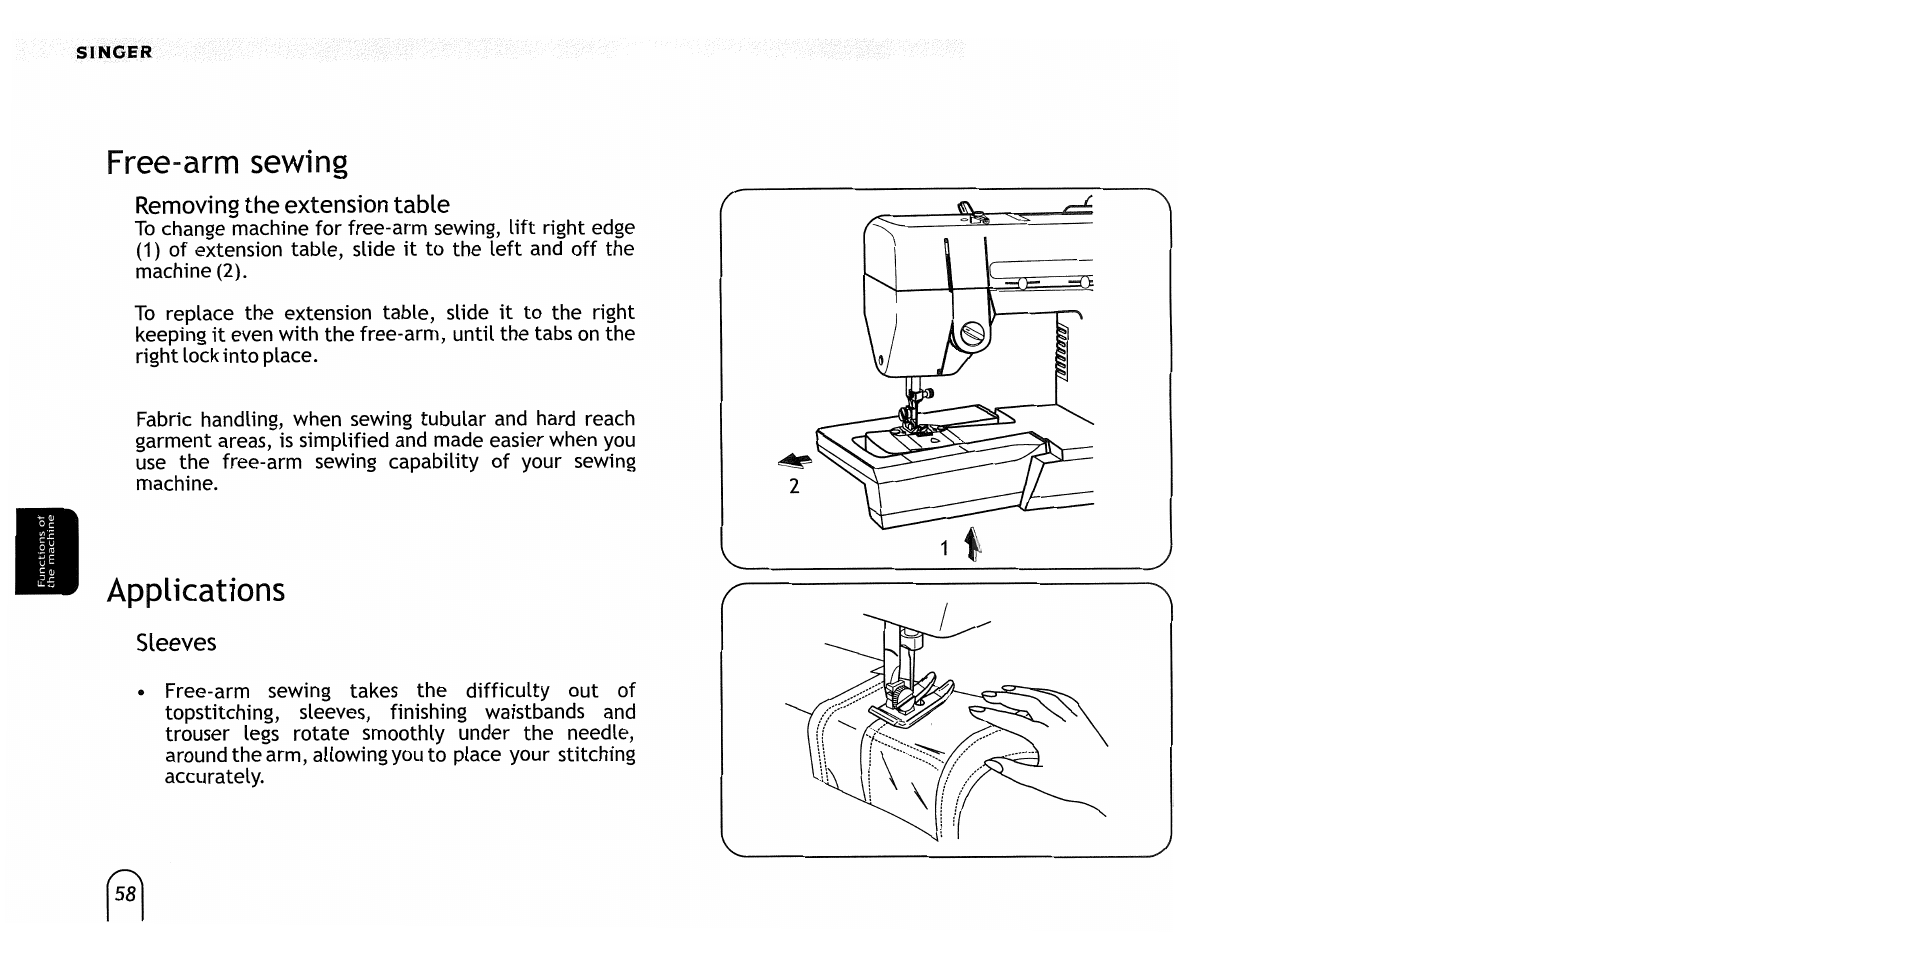 Free-arm sewing, Removing the extension table, Applications | Sleeves, Free-arm sewing removing the extension table | SINGER 2517 Merritt User Manual | Page 61 / 80